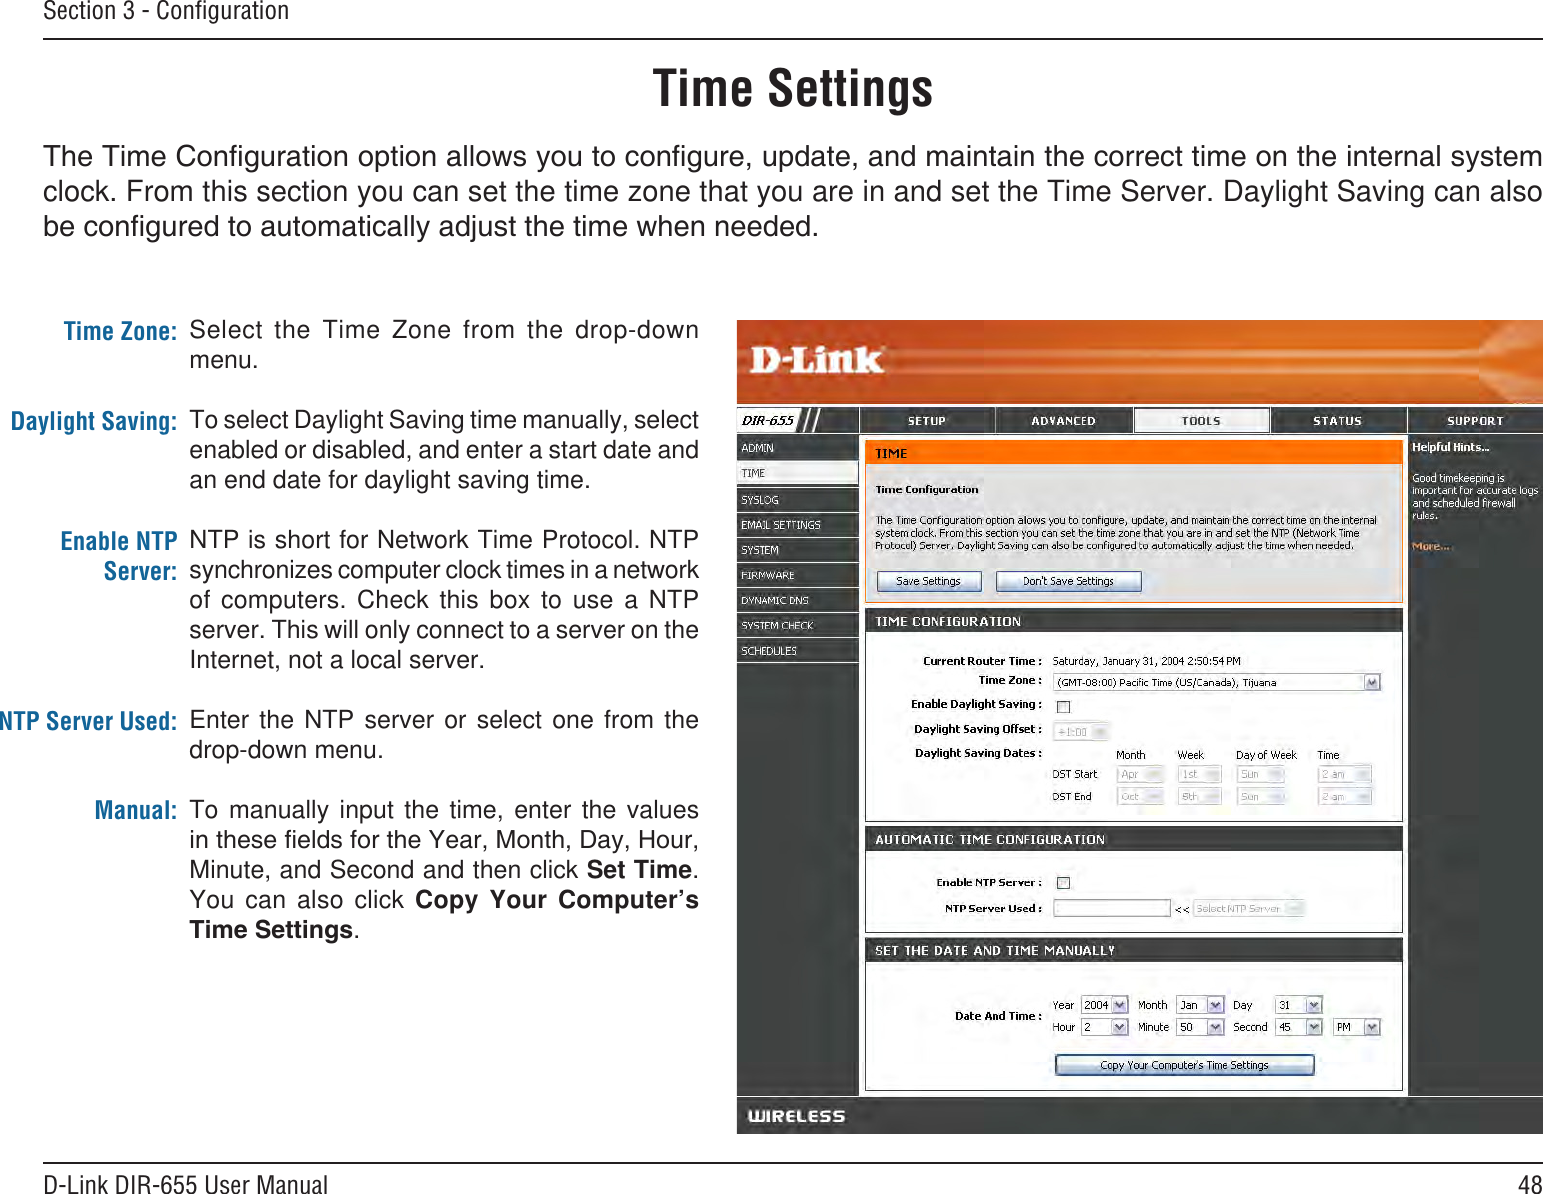 48D-Link DIR-655 User ManualSection 3 - ConﬁgurationTime SettingsSelect  the  Time  Zone  from  the  drop-down menu.To select Daylight Saving time manually, select enabled or disabled, and enter a start date and an end date for daylight saving time.NTP is short for Network Time Protocol. NTP synchronizes computer clock times in a network of  computers.  Check  this  box  to  use  a  NTP server. This will only connect to a server on the Internet, not a local server.Enter  the  NTP  server  or  select  one  from  the drop-down menu.To  manually  input  the  time,  enter  the  values Minute, and Second and then click Set Time. You  can  also  click  Copy  Your  Computer’s .Time Zone:Daylight Saving:Enable NTP Server:NTP Server Used:Manual:clock. From this section you can set the time zone that you are in and set the Time Server. Daylight Saving can also 